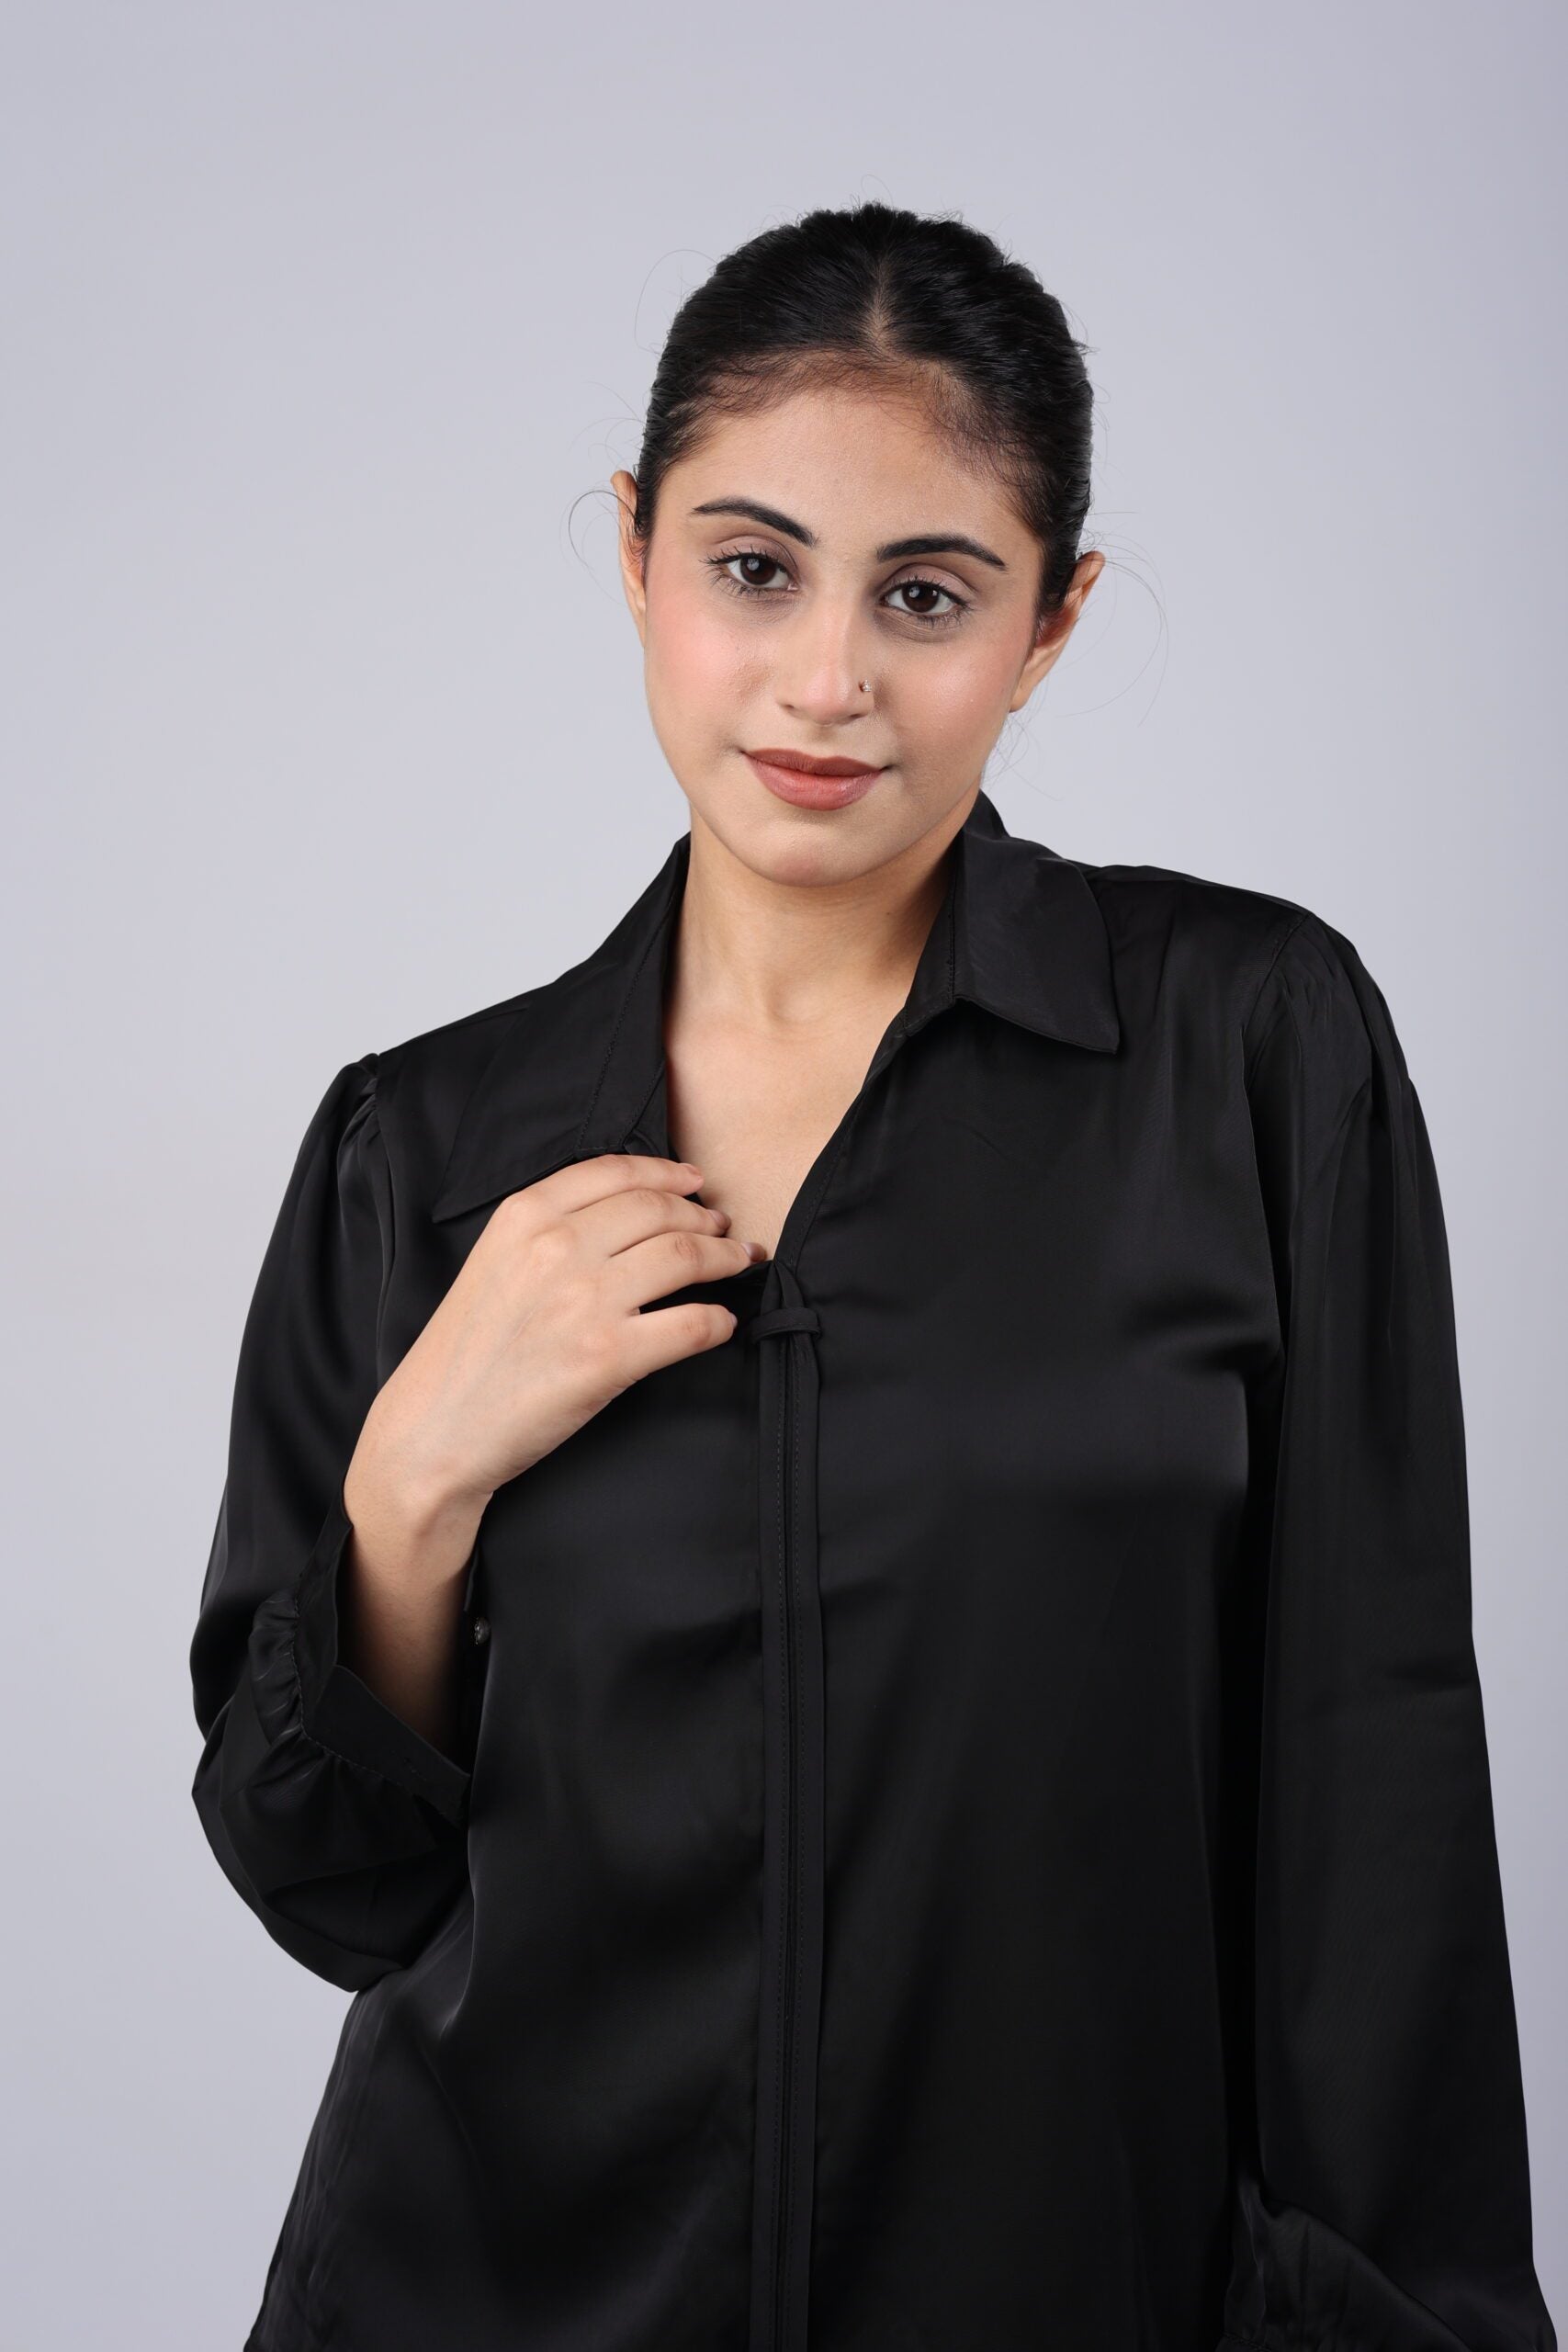 Black Satin Formal/Casual Top - Your Timeless Elegance and Versatility in One!